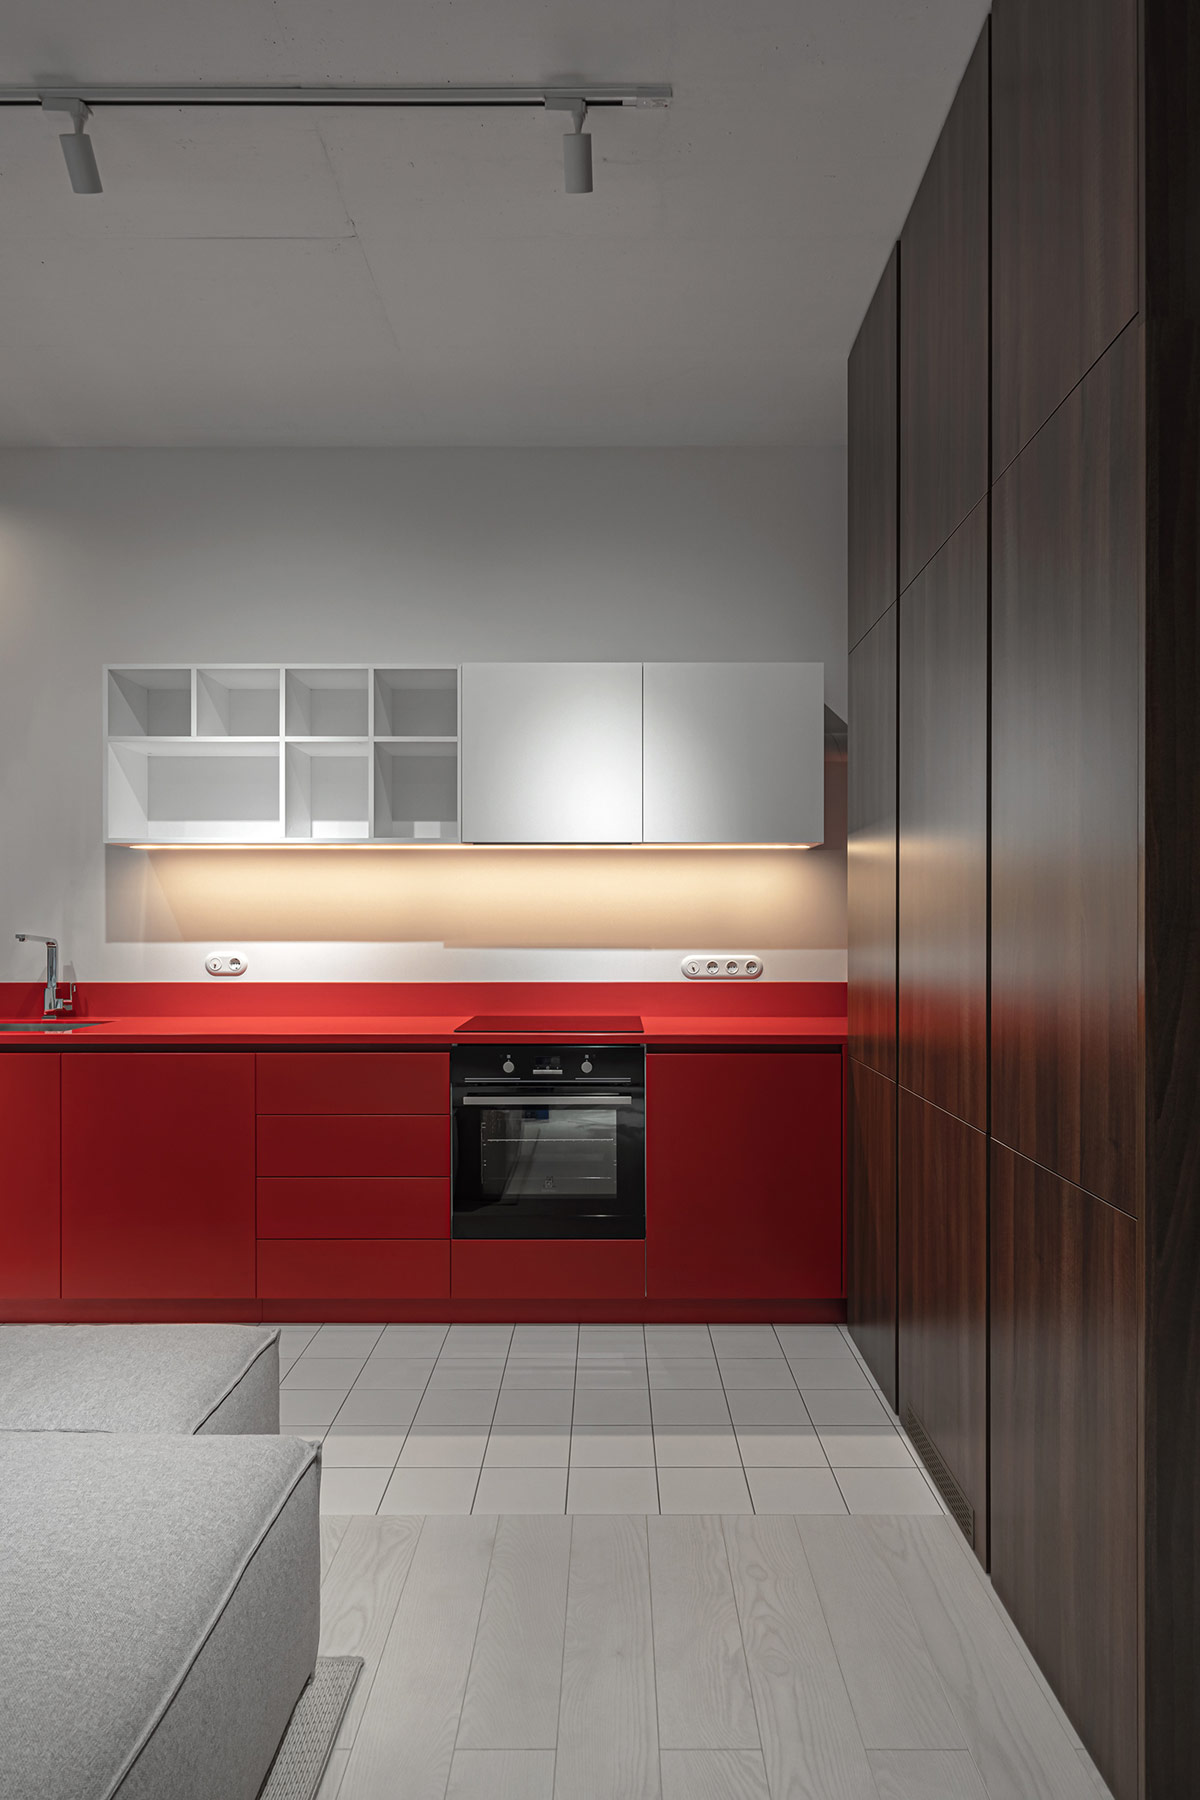 https://www.home-designing.com/wp-content/uploads/2021/01/small-red-kitchen.jpg